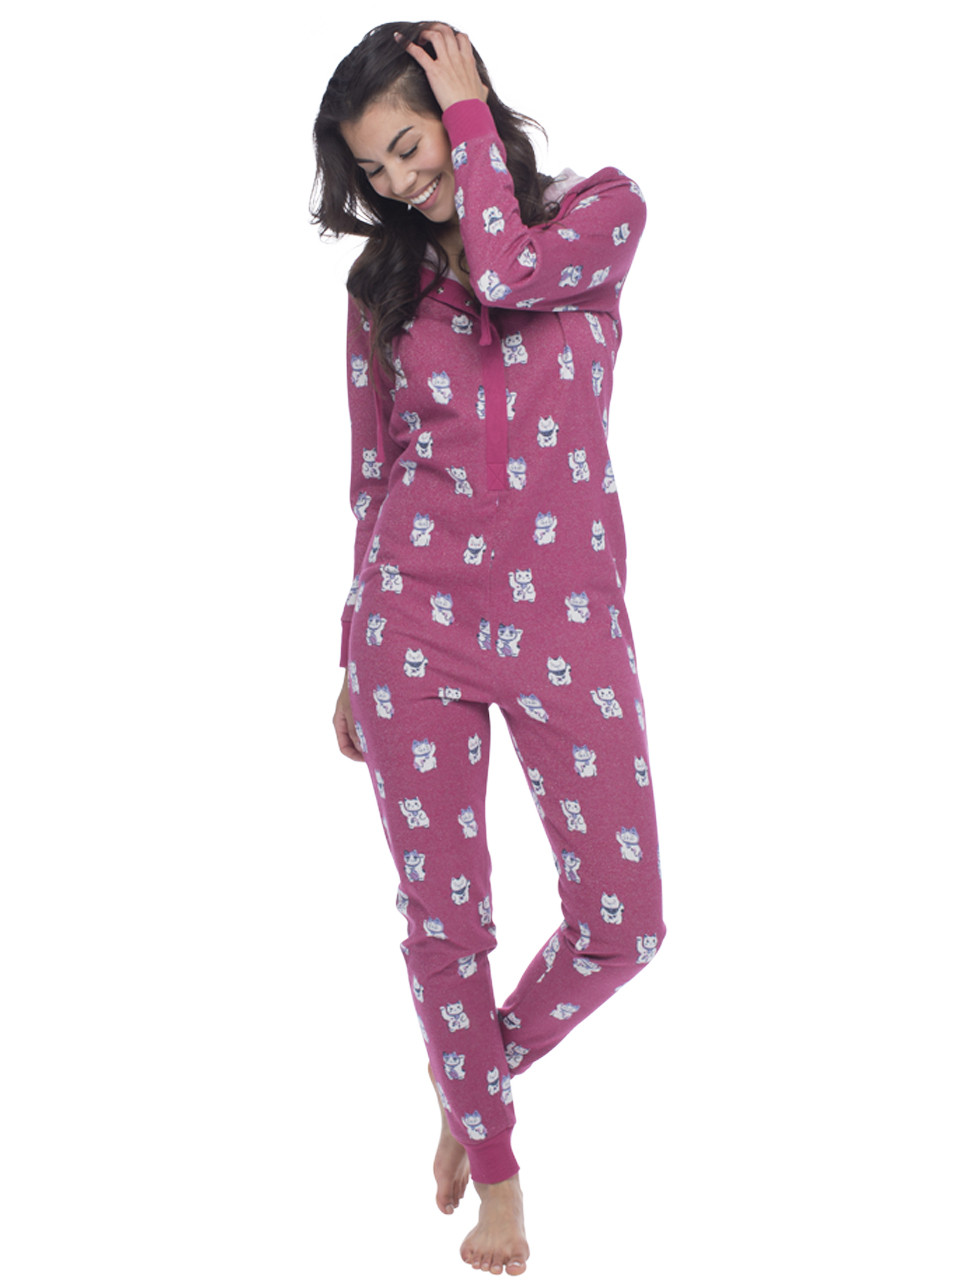 pj onesies for adults